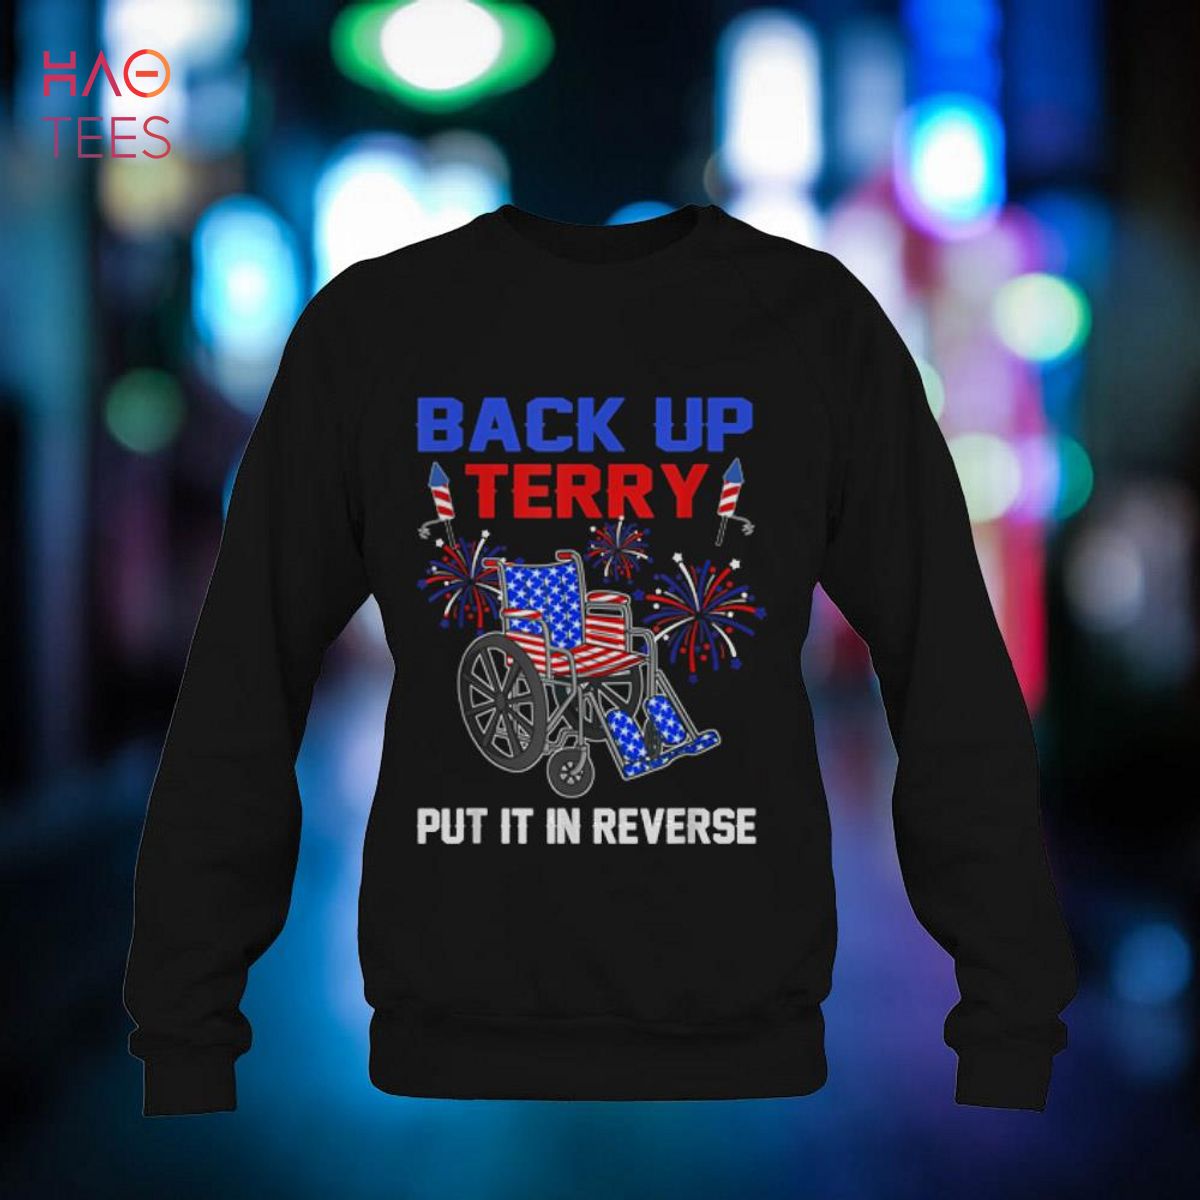 4th of July Tees,Funny 4th Of July Tee Shirt,Funny Fourth of July Unisex Tshirt Back It Up Terry Put It In Reverse Shirt 4th of July Shirt